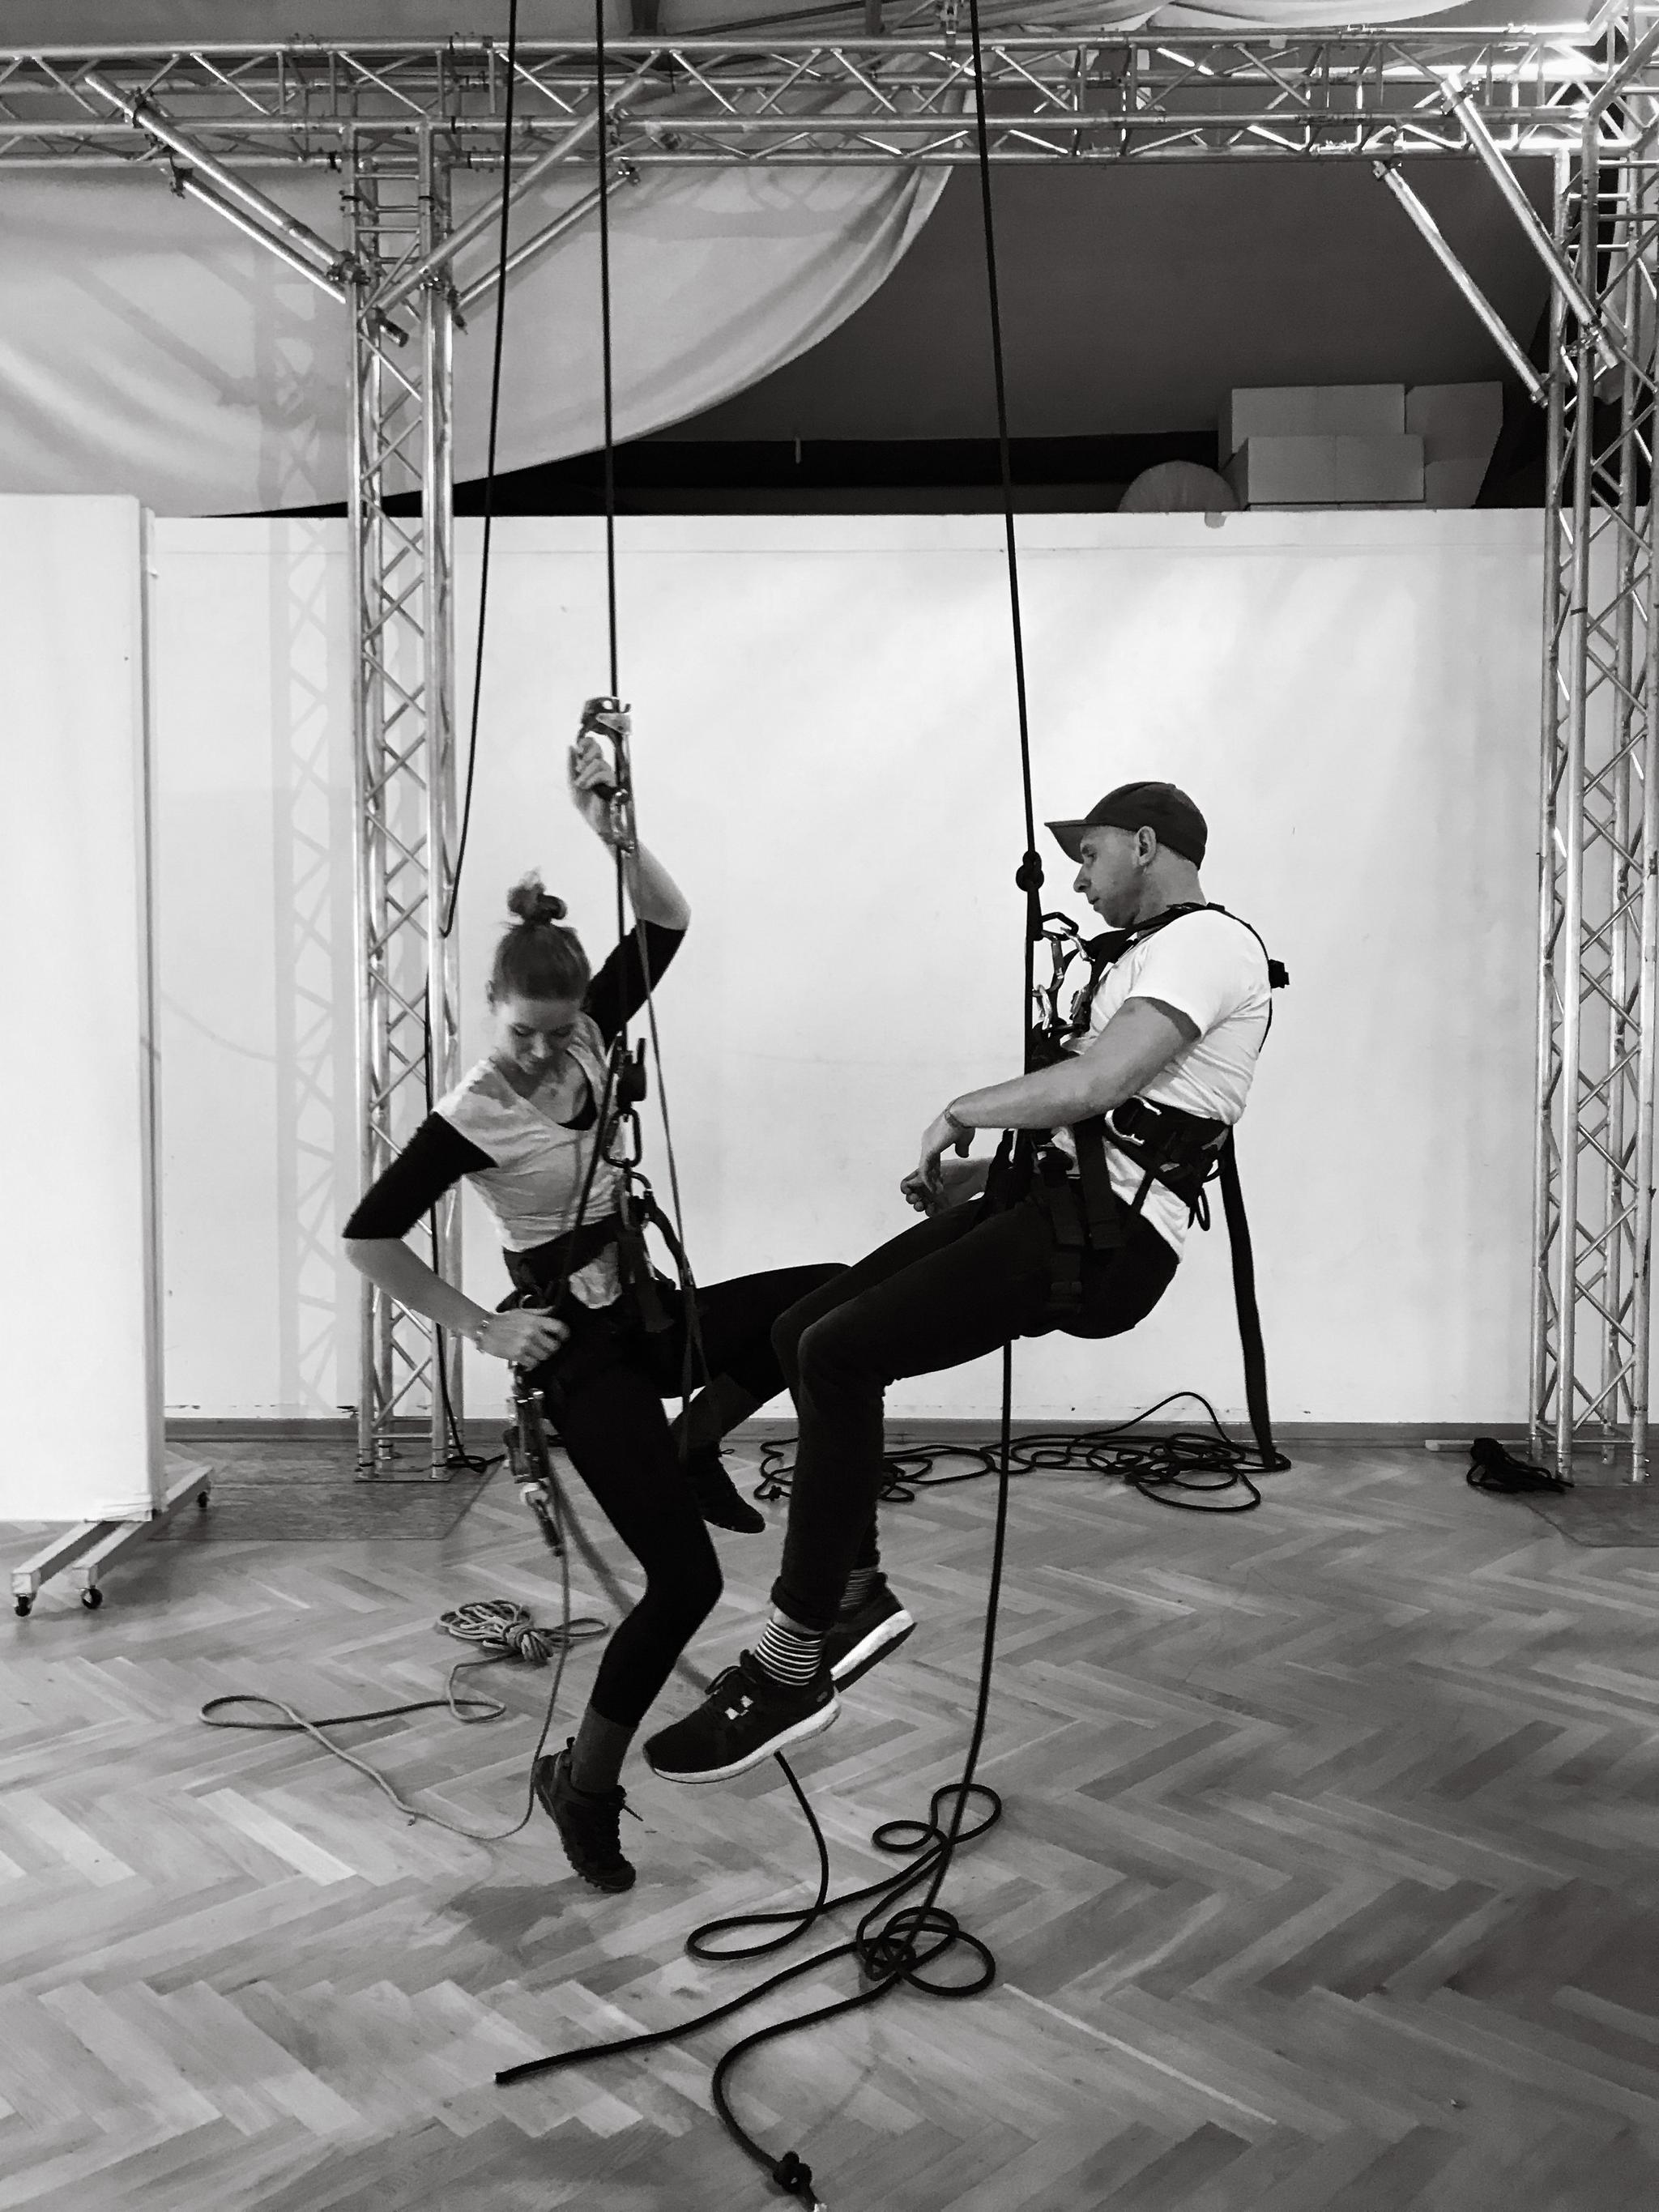 Two people hang close to a wood parquet floor from black ropes tied to metal trusses. They are secured with carabeeners and harnesses. The photo is black and white.